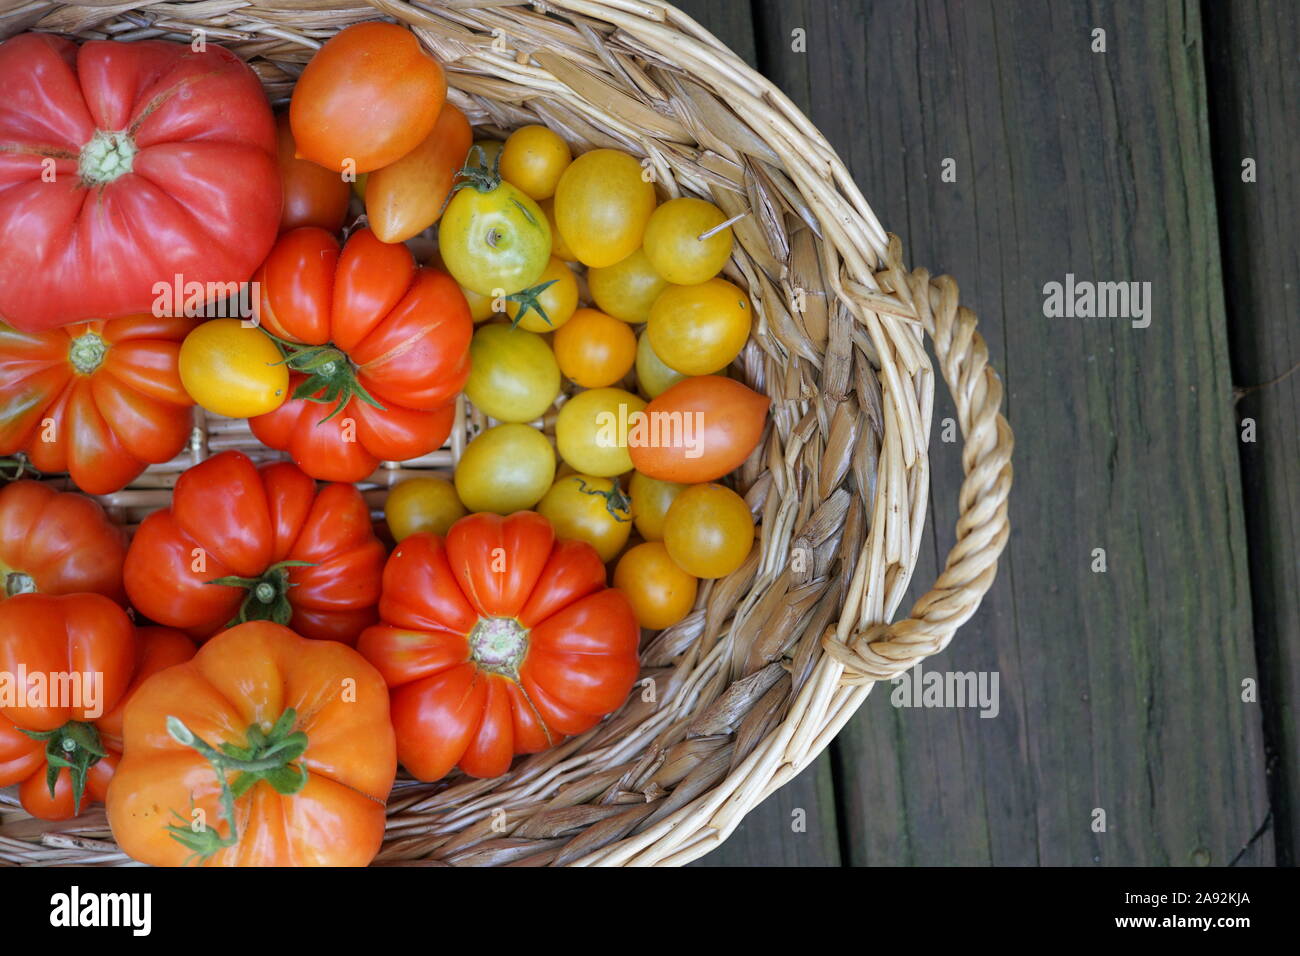 Tomato harvest, variety of colorful tomatoes Stock Photo